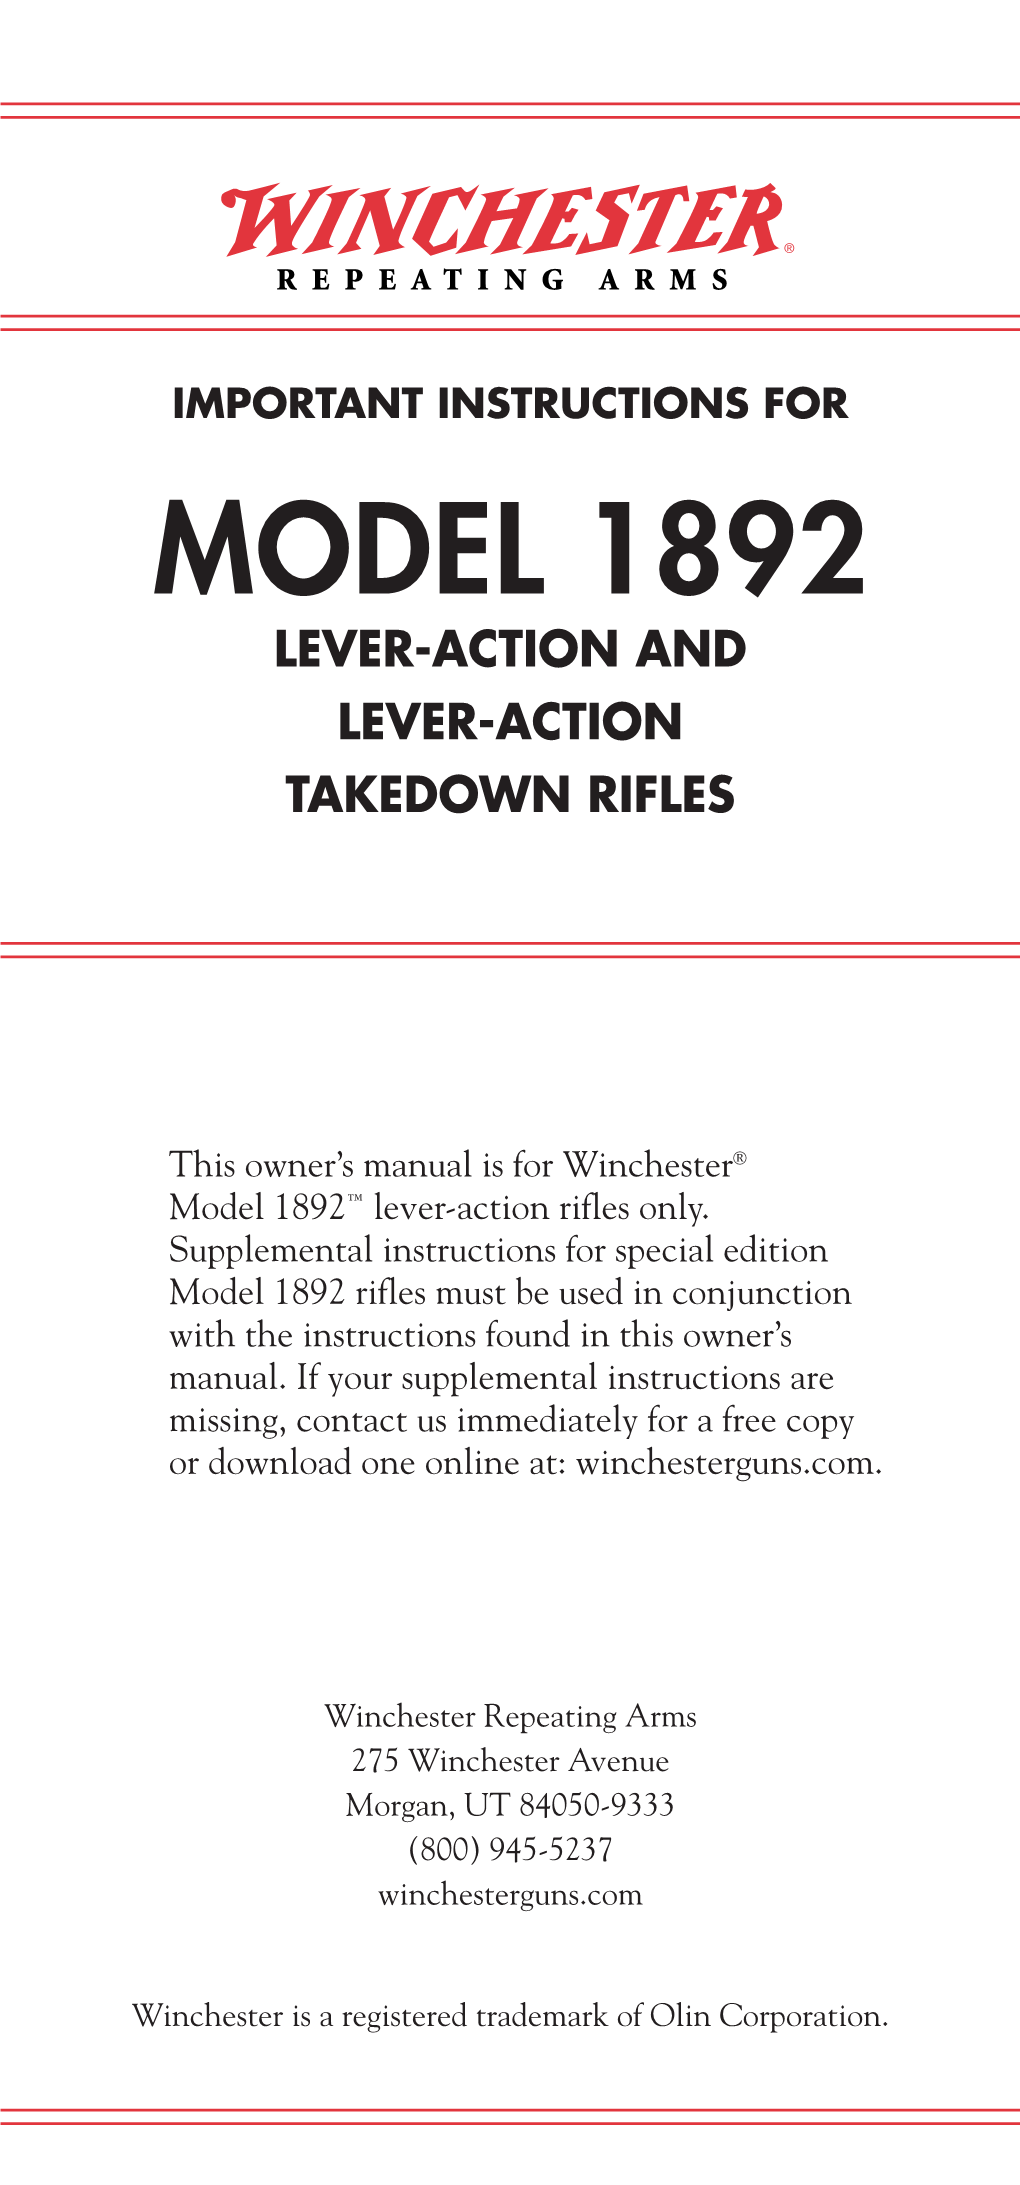 Model 1892 Lever-Action and Lever-Action Takedown Rifles